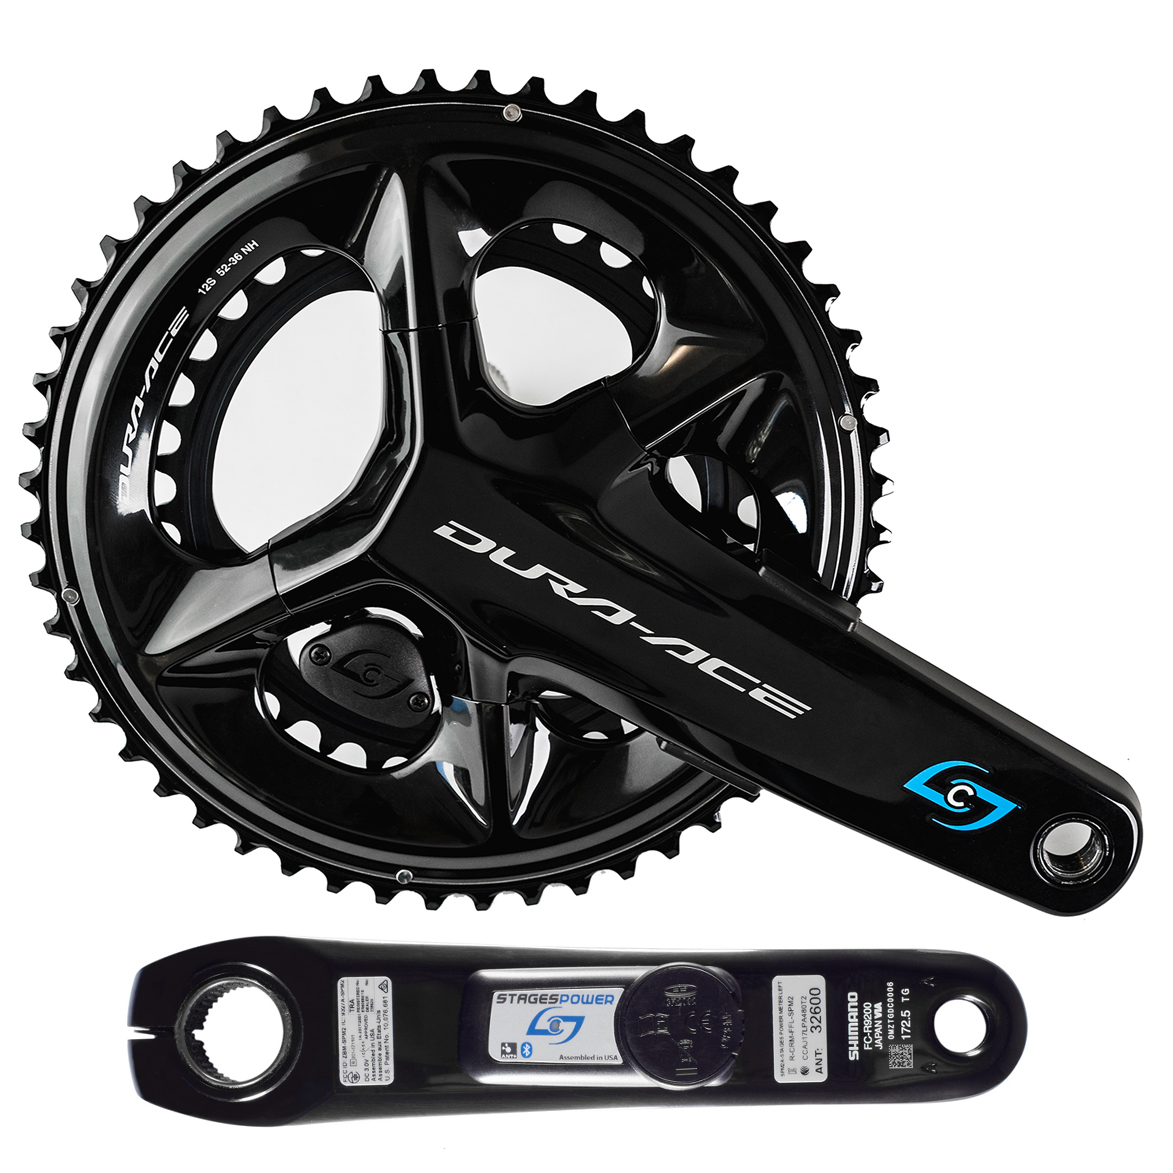 Picture of Stages Cycling Power LR Powermeter | Crankset by Shimano - Dura Ace R9200 | 2x12-speed - black - 2nd Choice